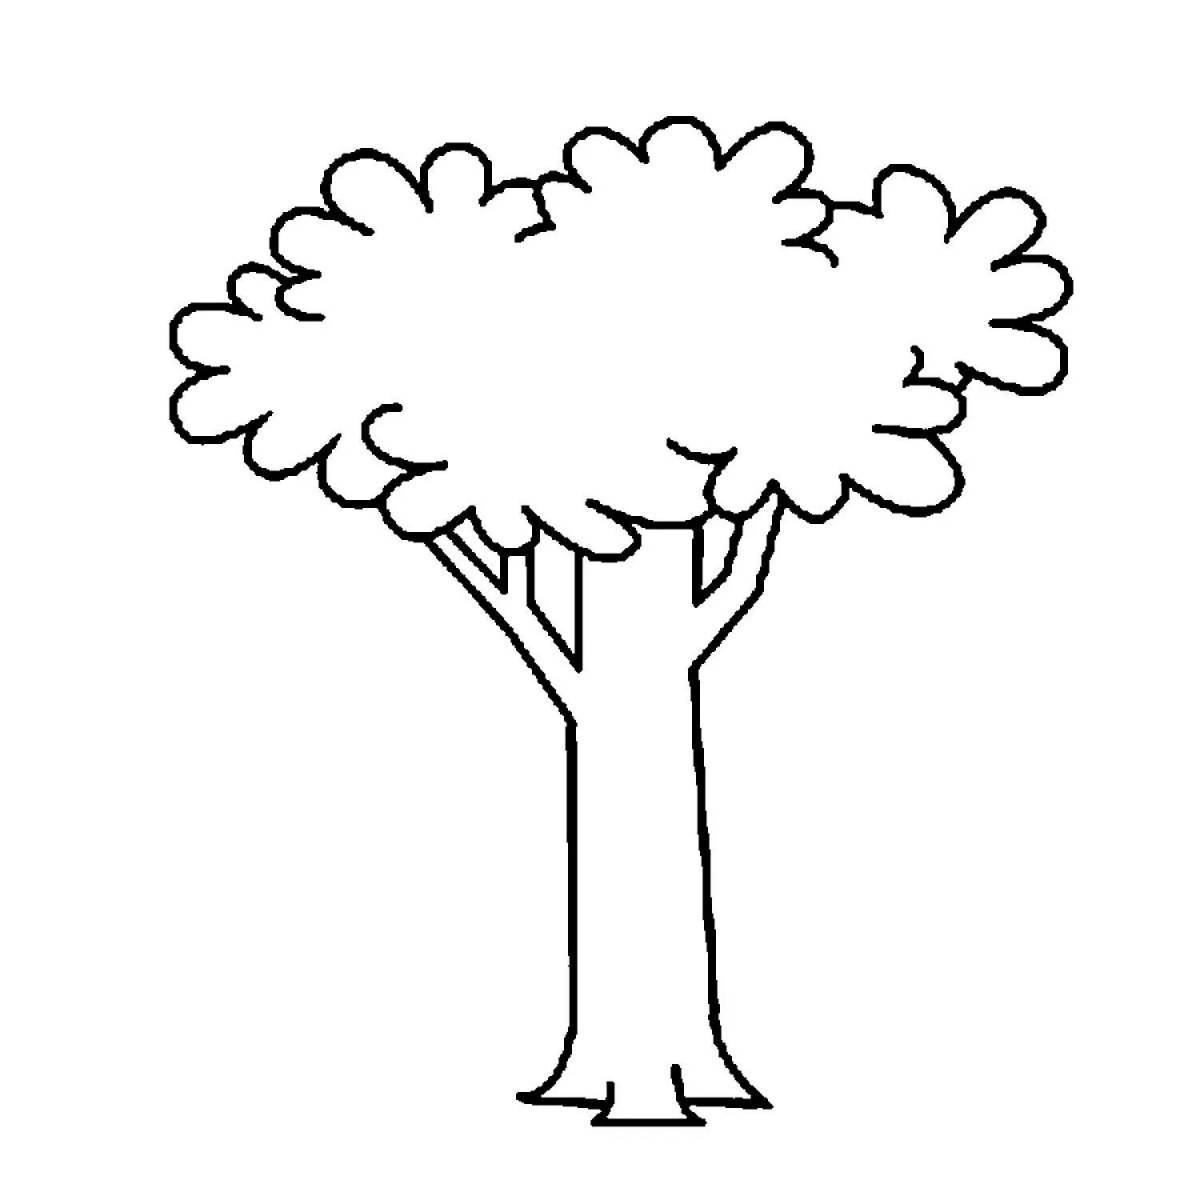 Exquisite tree silhouette coloring book